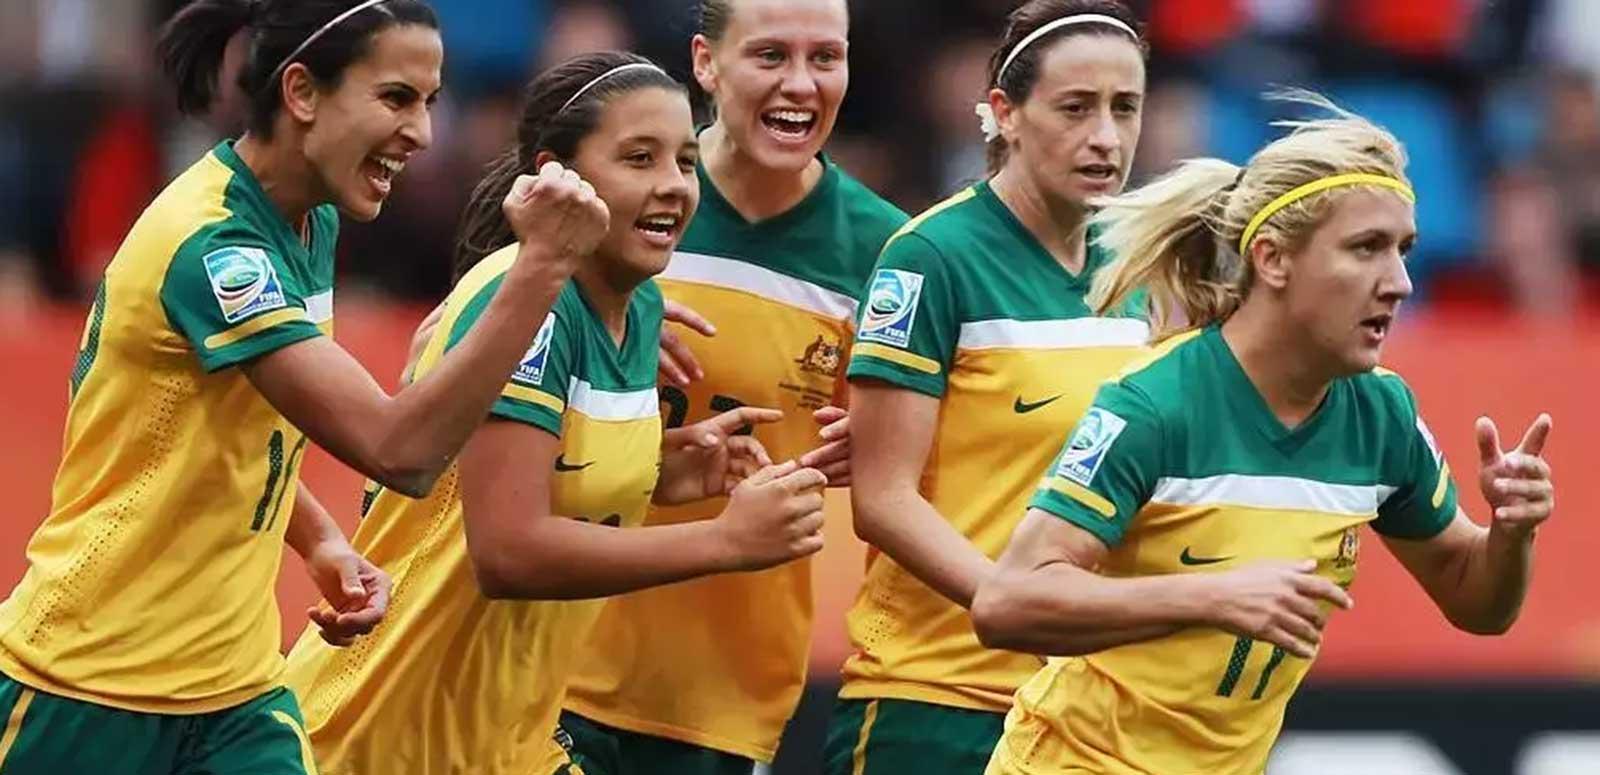 Five players from the Australian Women's Soccer team running side by side, they are smiling and look to be celebrating scoring a goal.